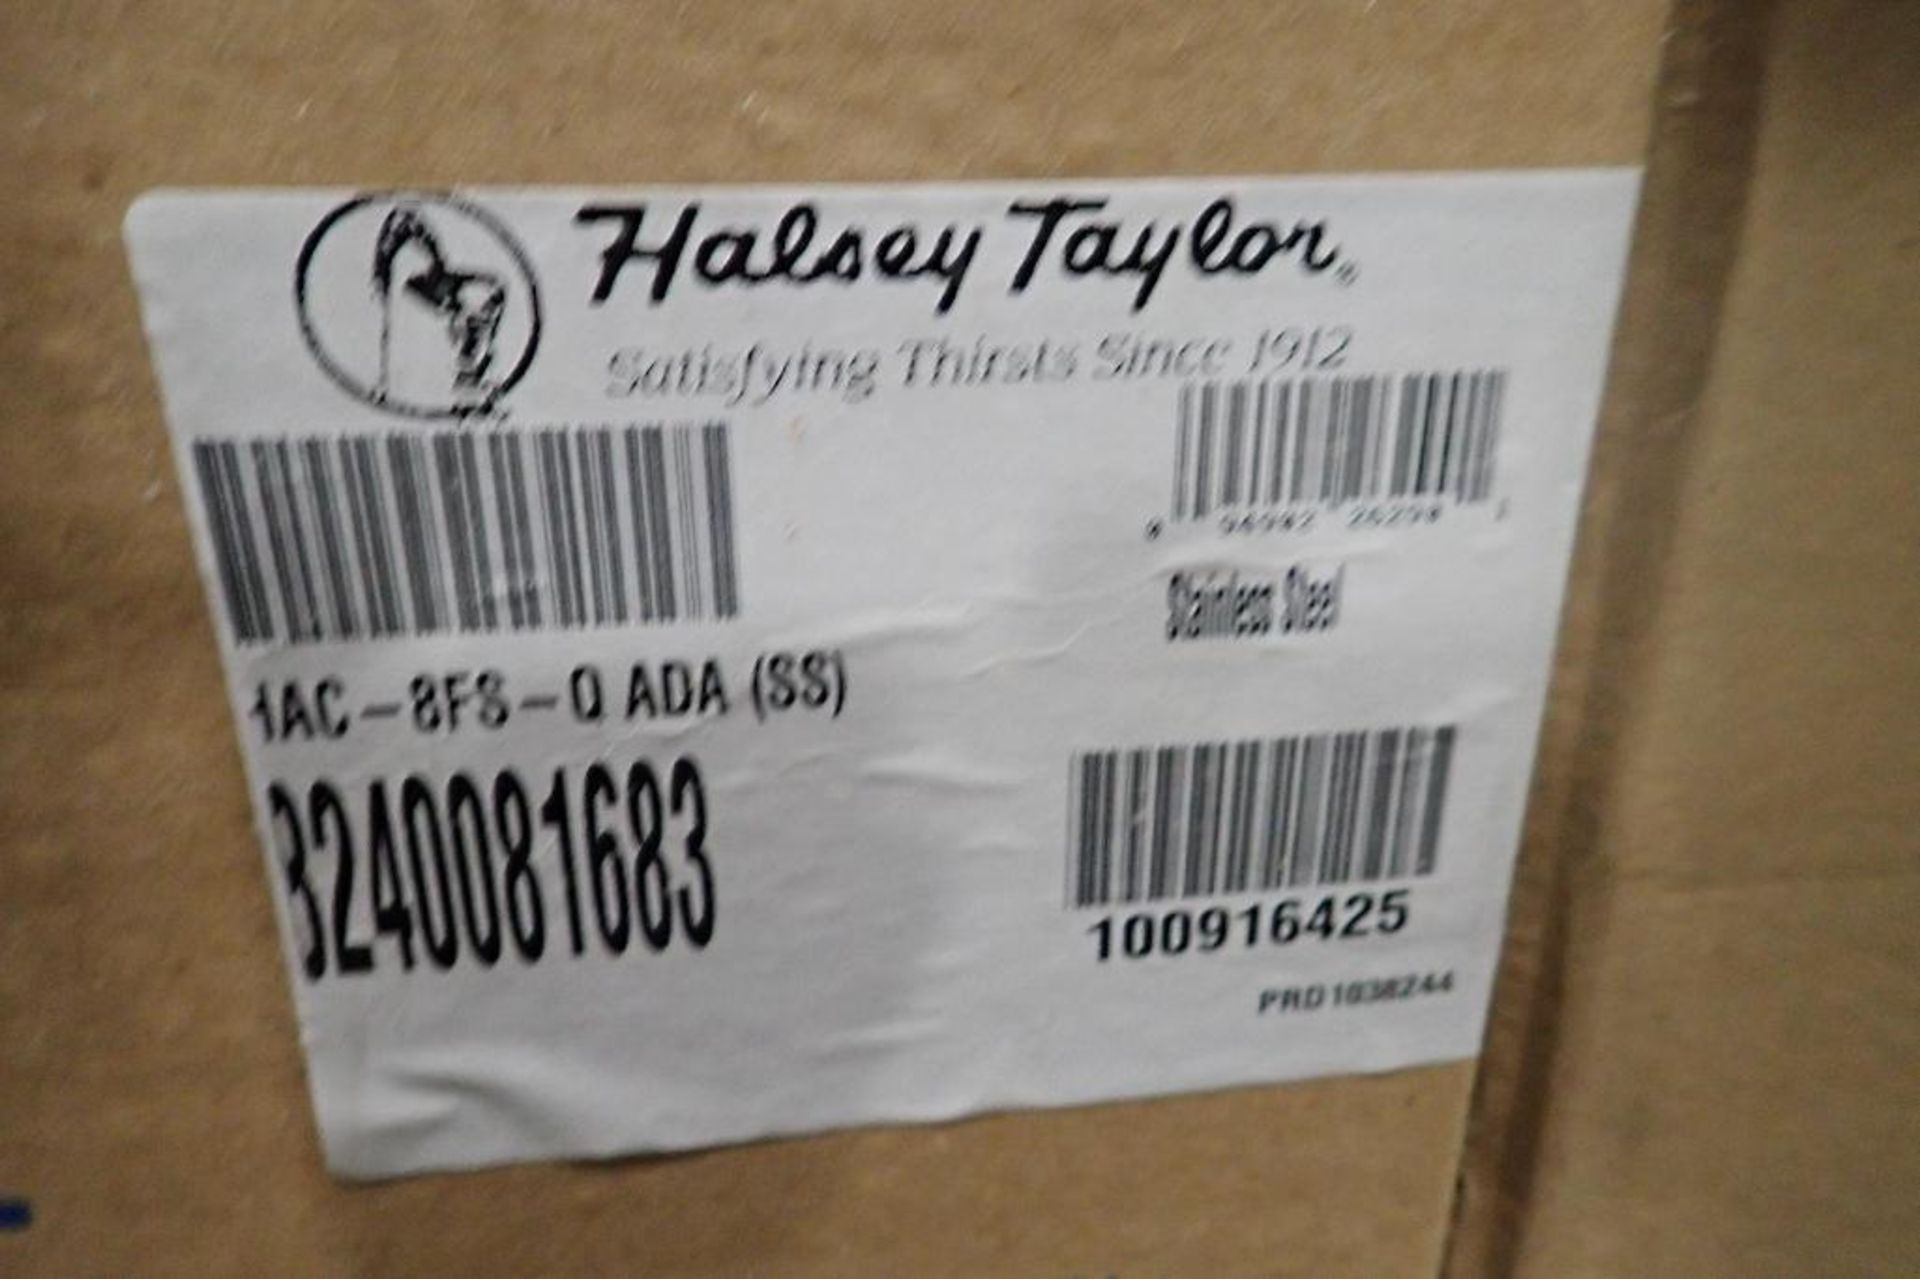 New Halsie Taylor water fountain. **Rigging Fee: $25** (Located in 3703 - Eagan, MN.) - Image 3 of 3